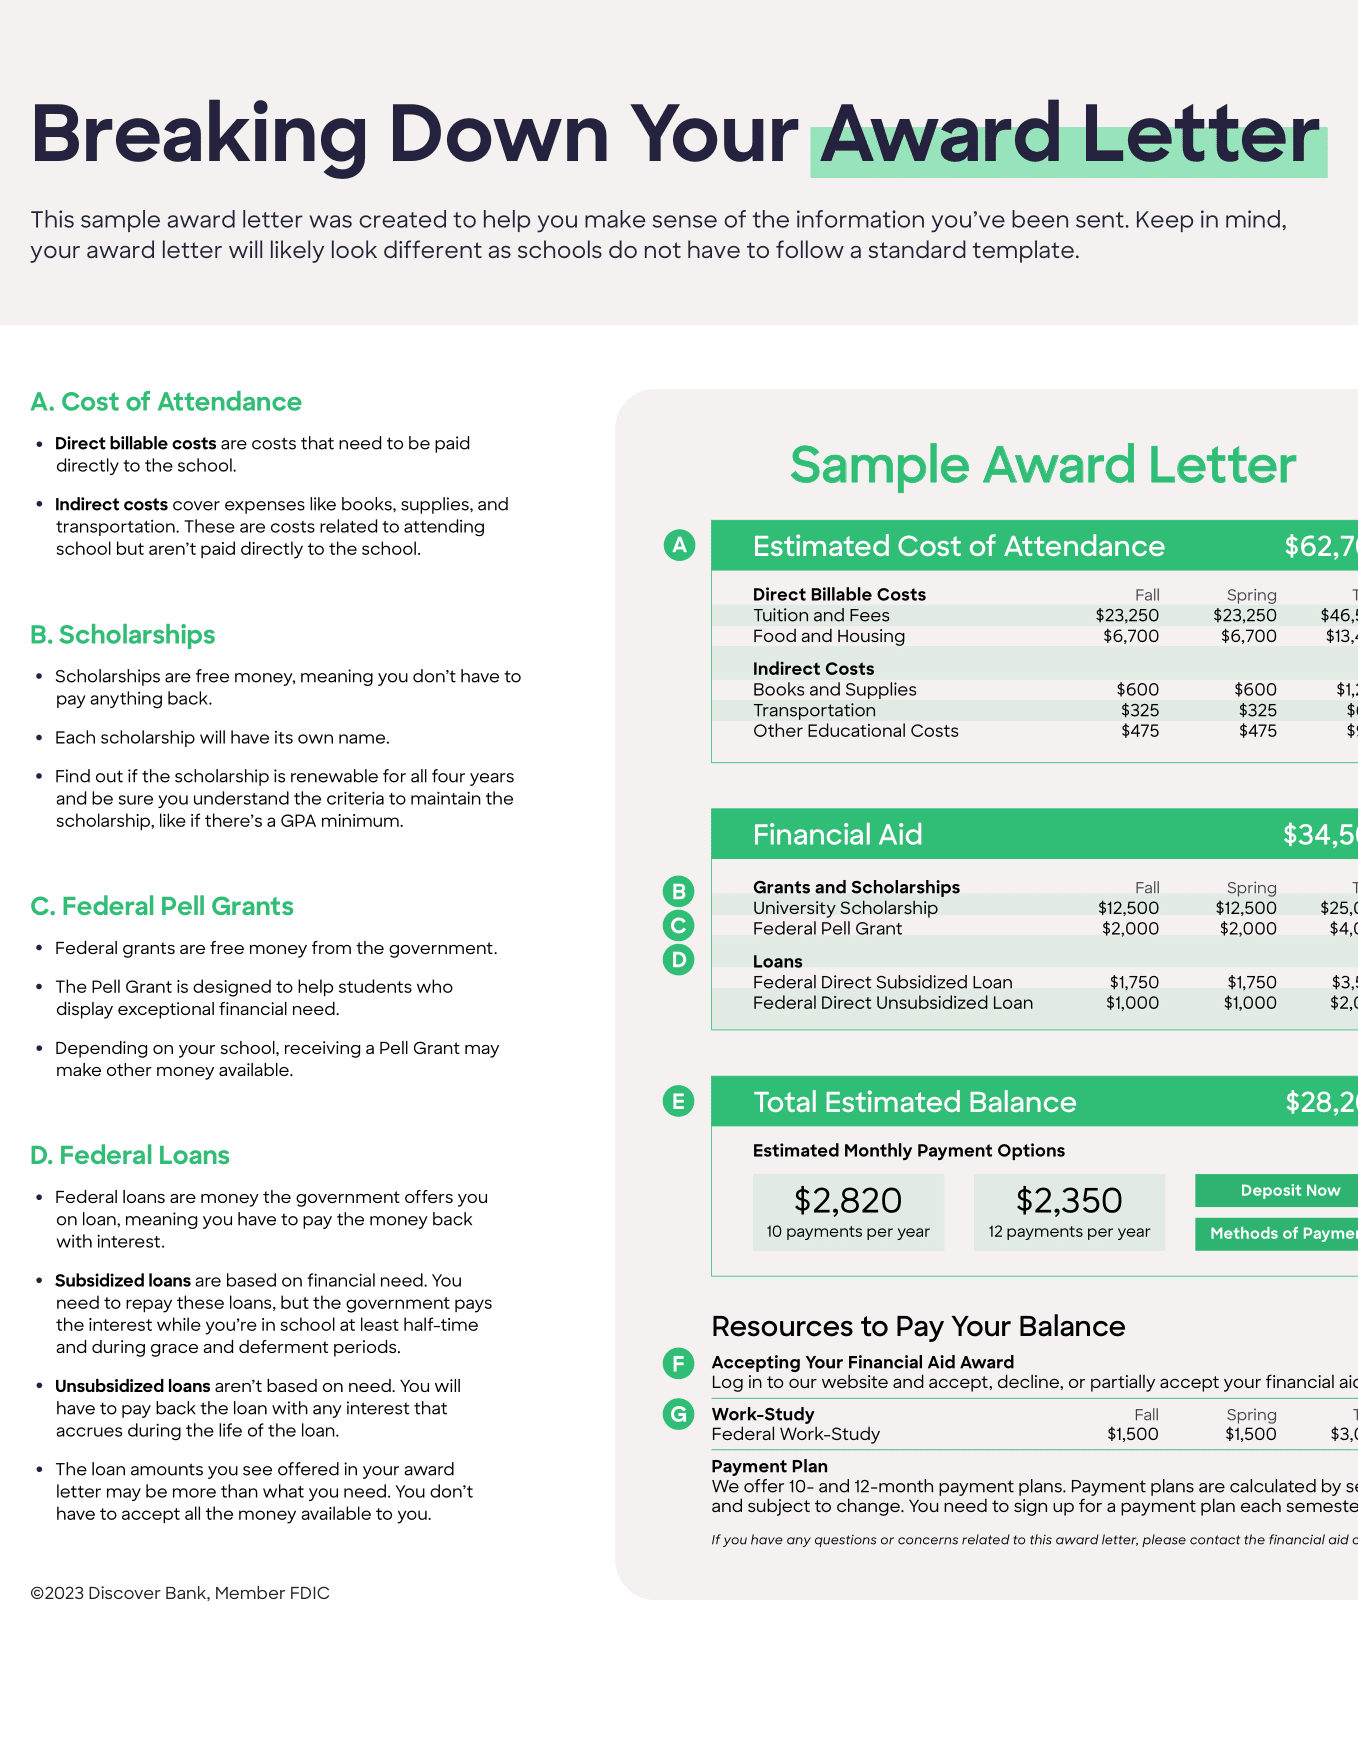 Breaking Down Your Award Letter